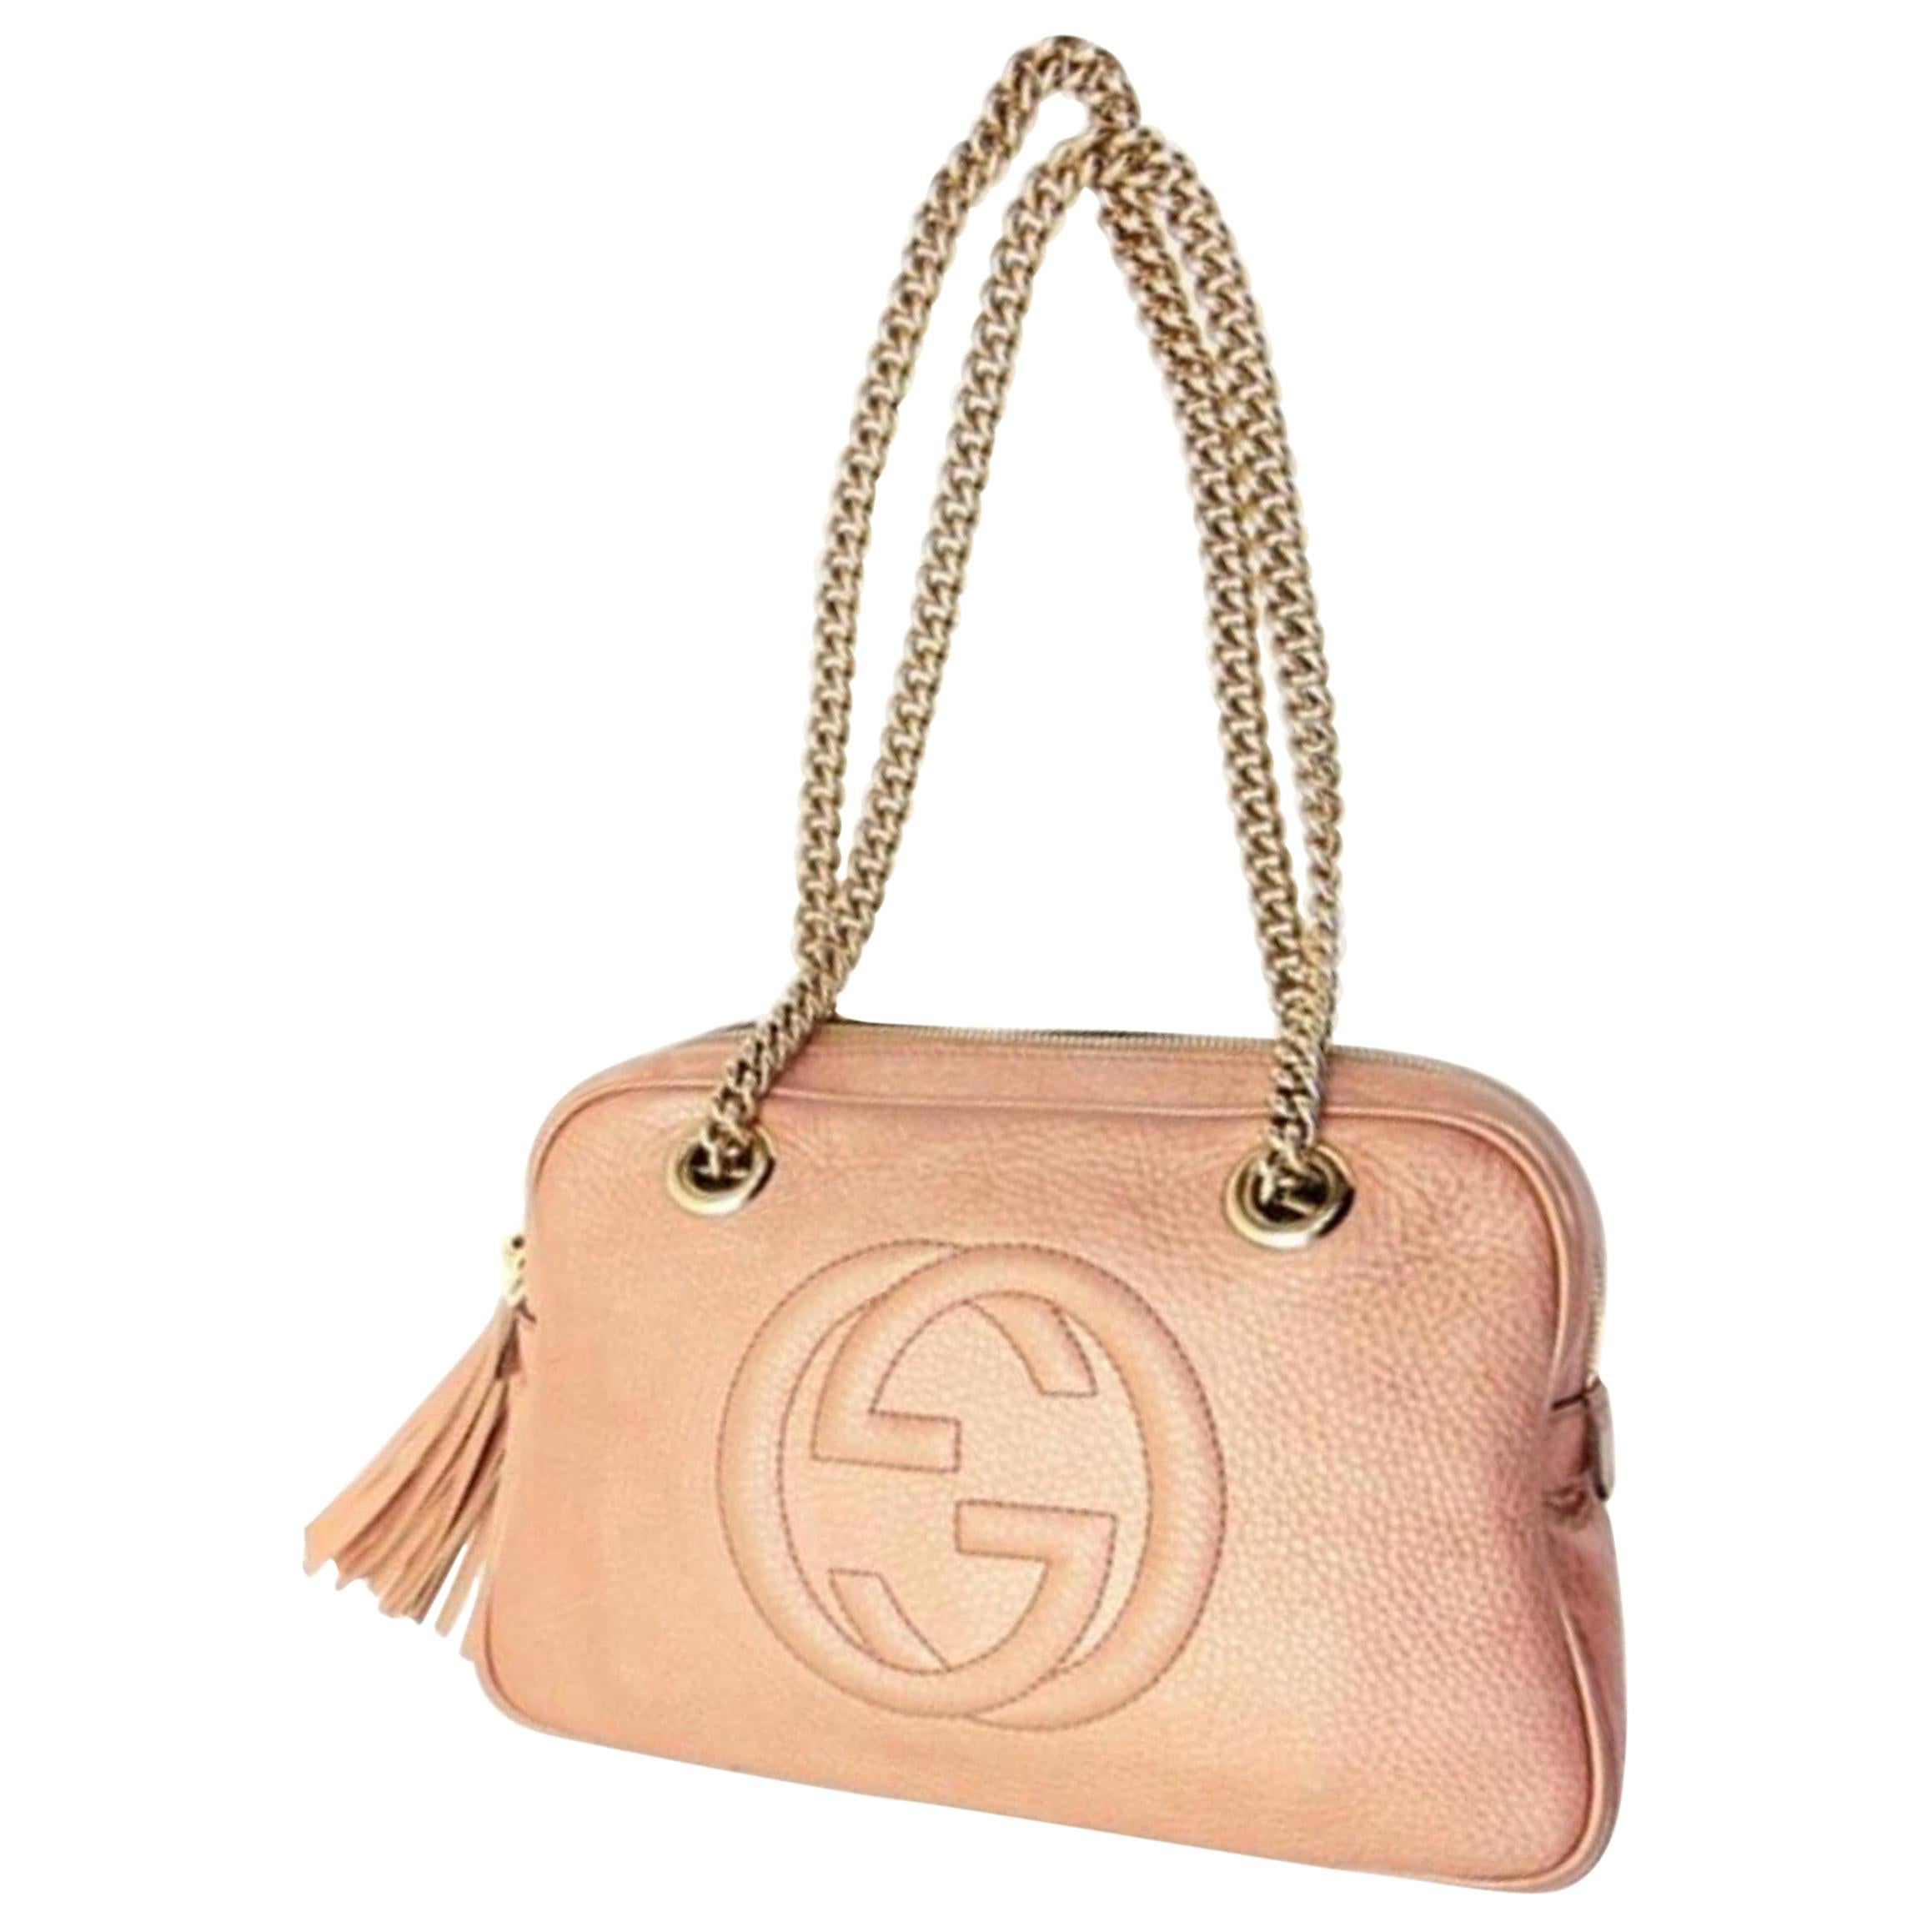 Gucci Soho (Ultra Rare) Chain Camera 227986 Pink Leather Shoulder Bag For Sale